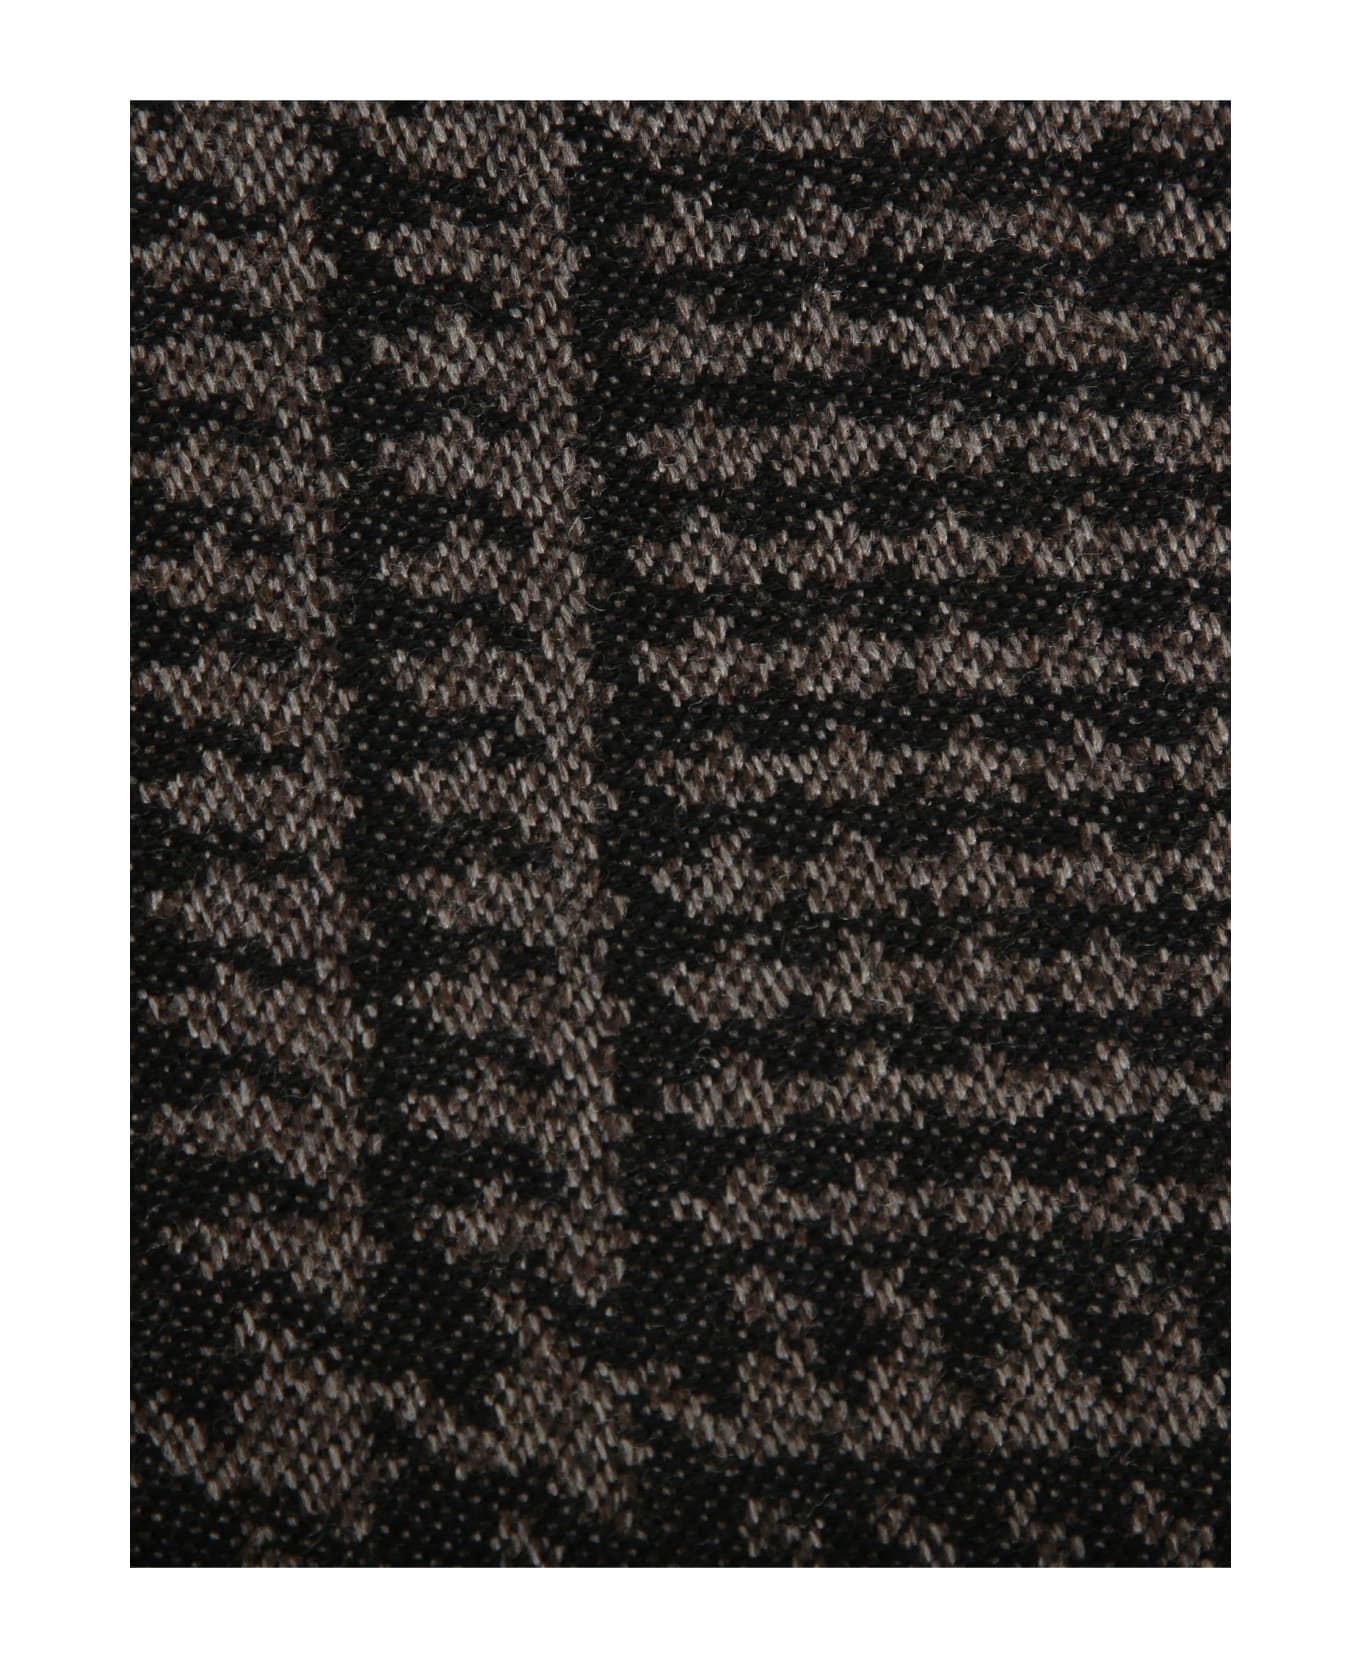 Kiton Houndstooth Patterned Scarf - Black